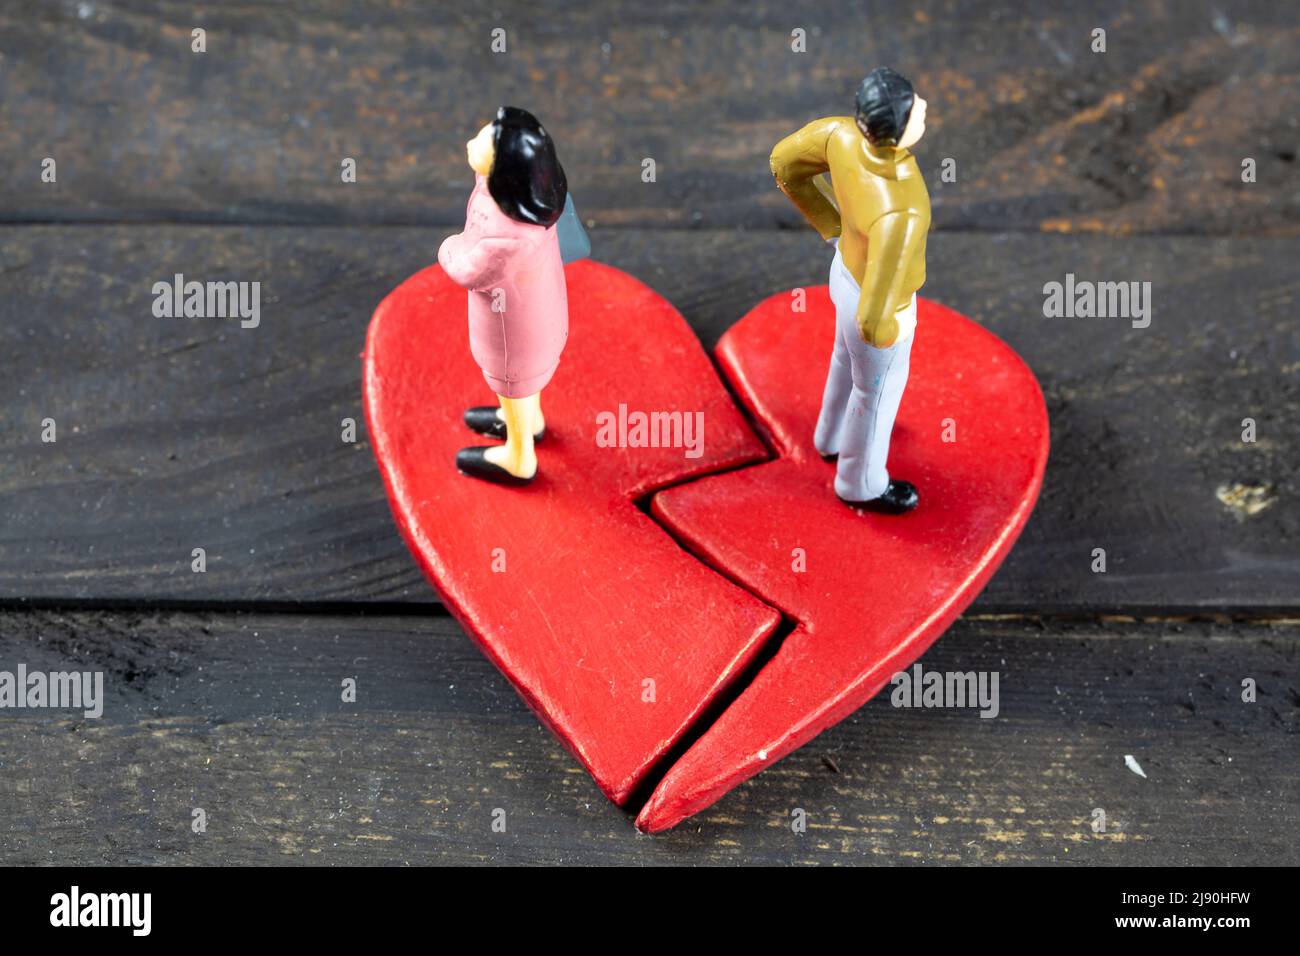 Couple Getting Divorced, Divorce or Love Consept Stock Photo